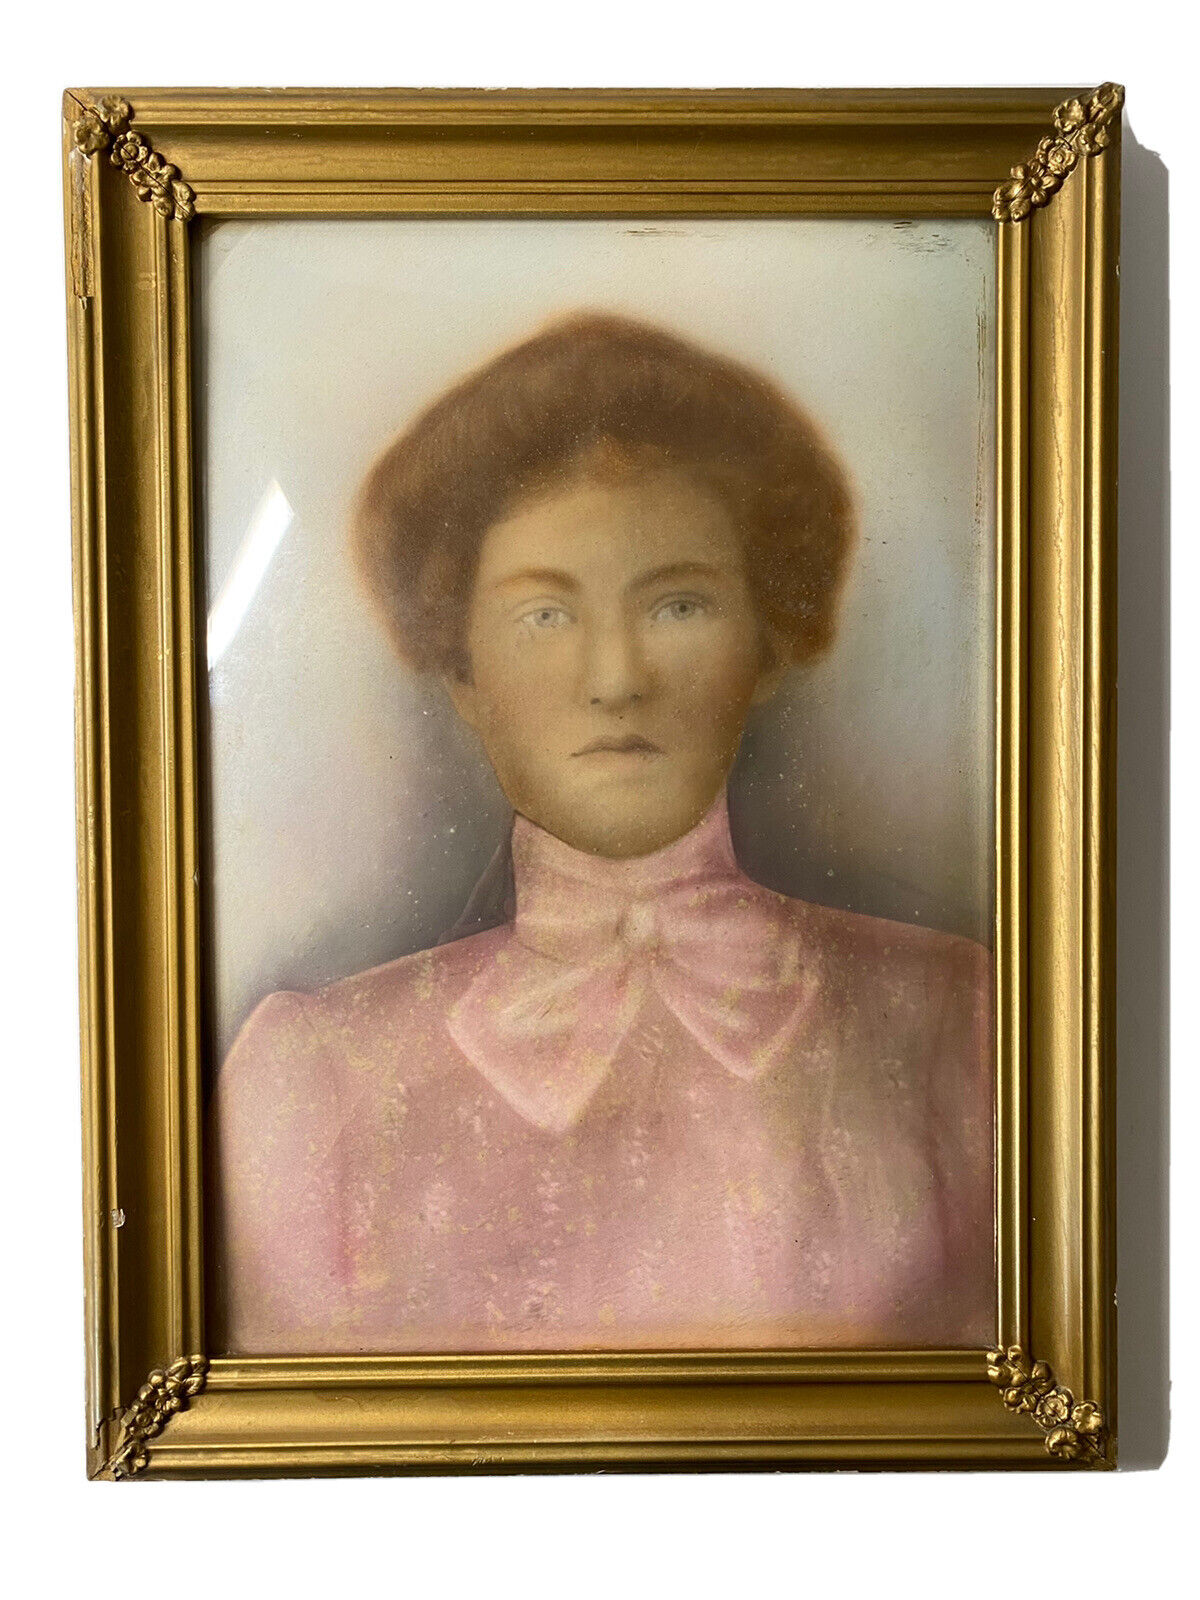 Antique Turn of the century hand tinted Woman’s portrait in convex glass frame